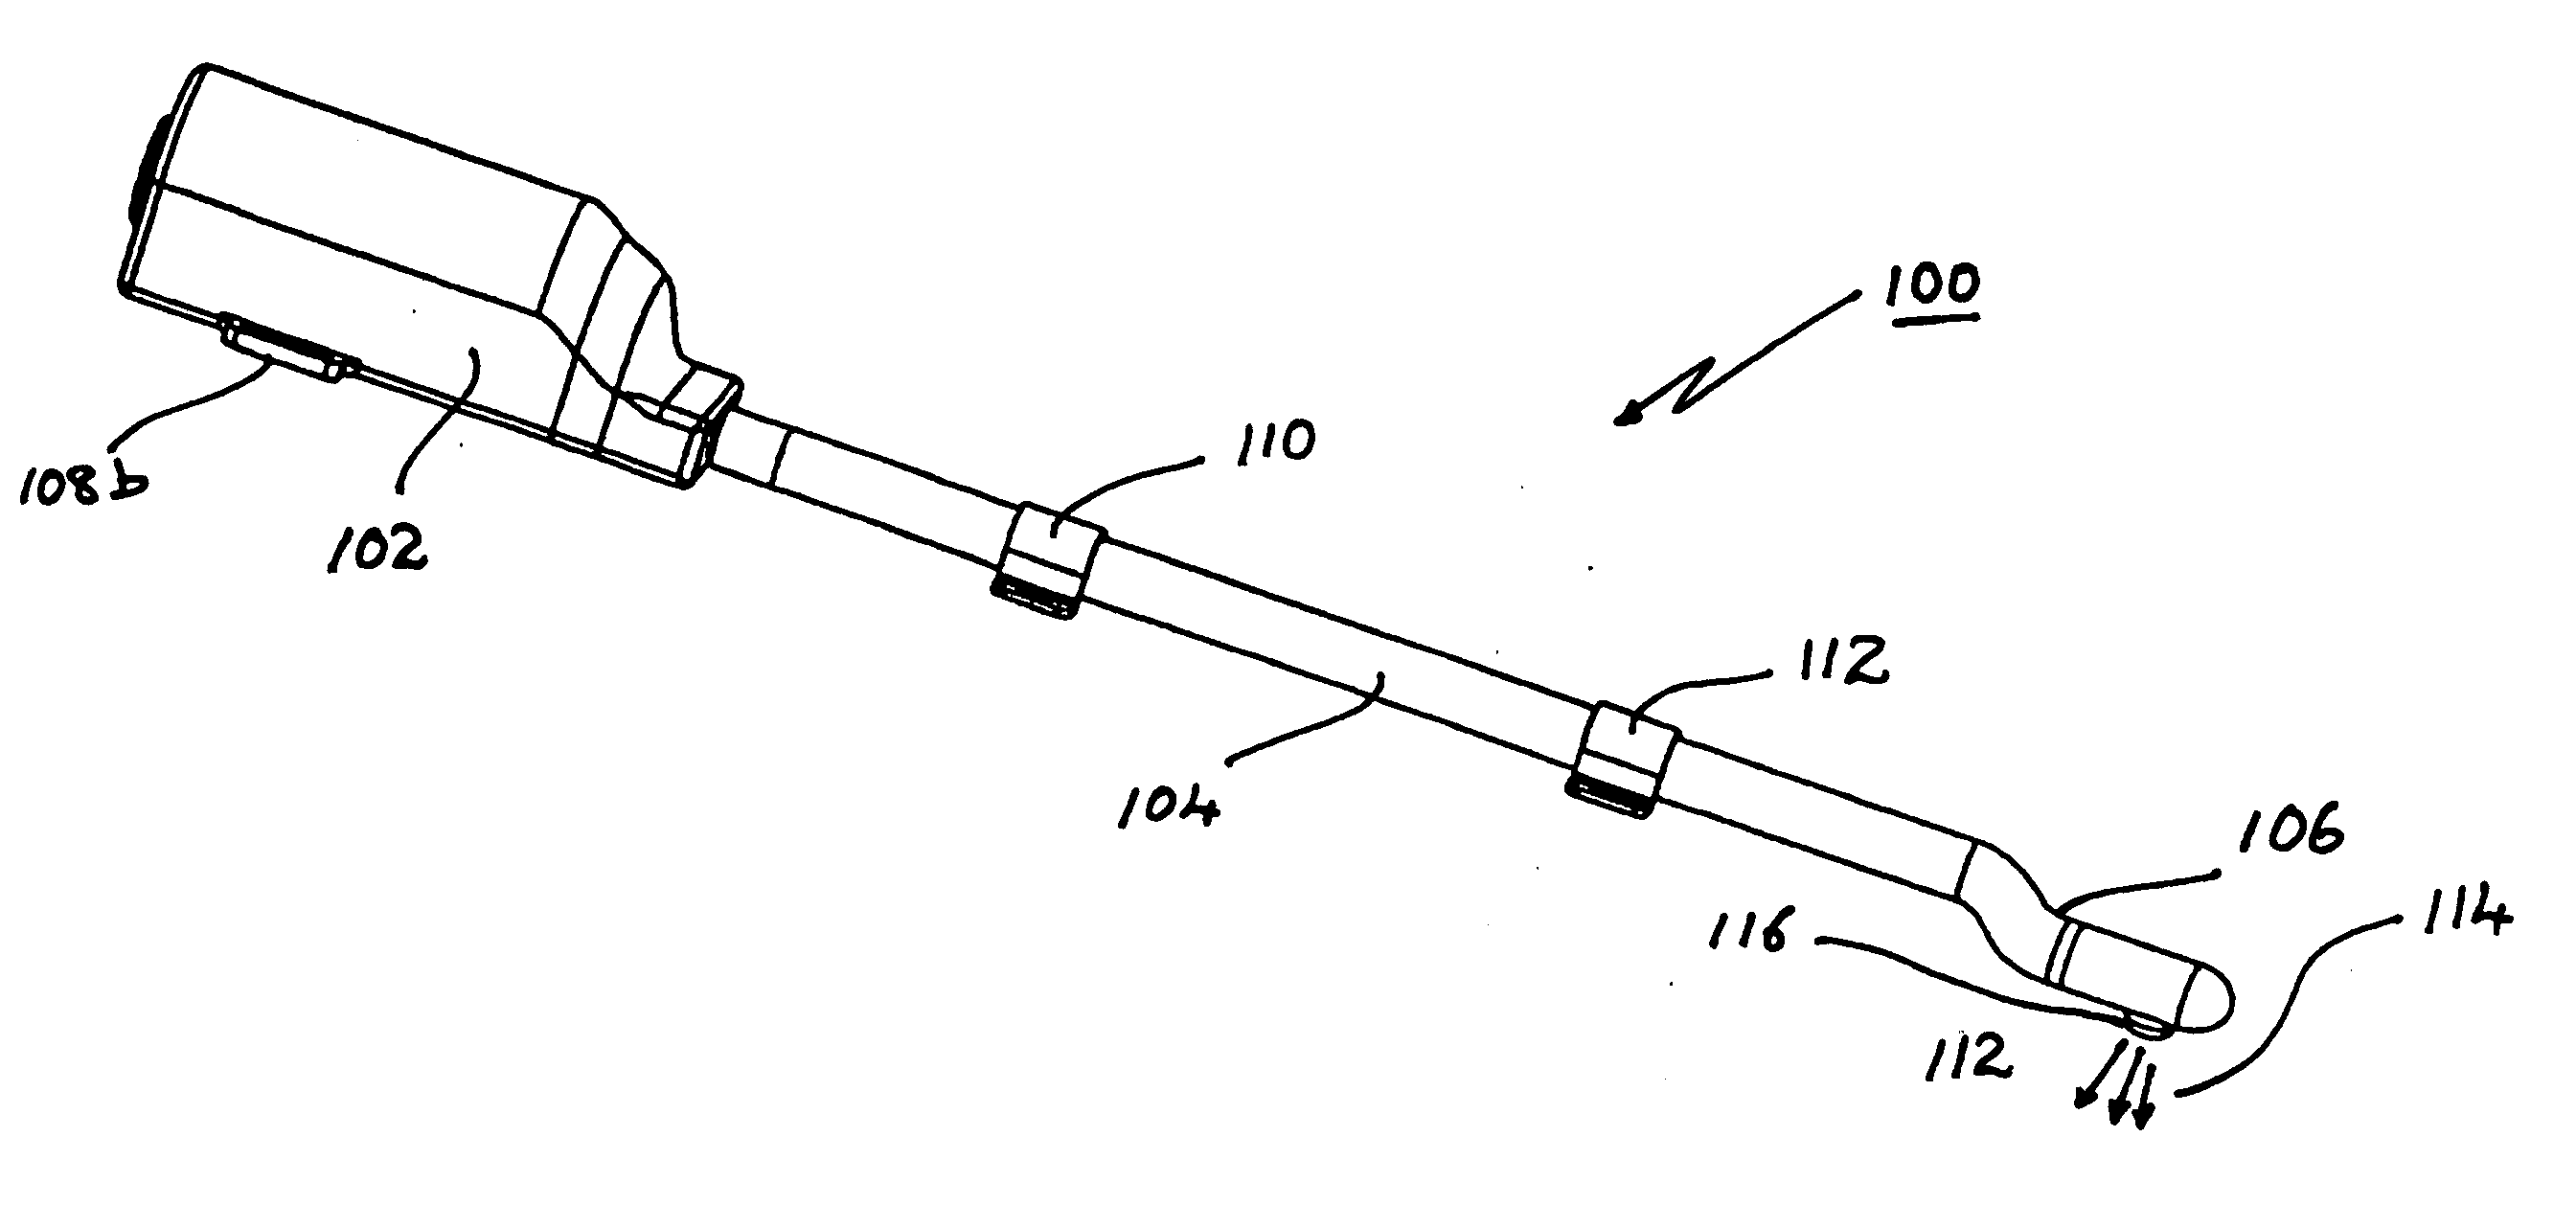 Compact lighting system attachable to a surgical tool and method of use thereof